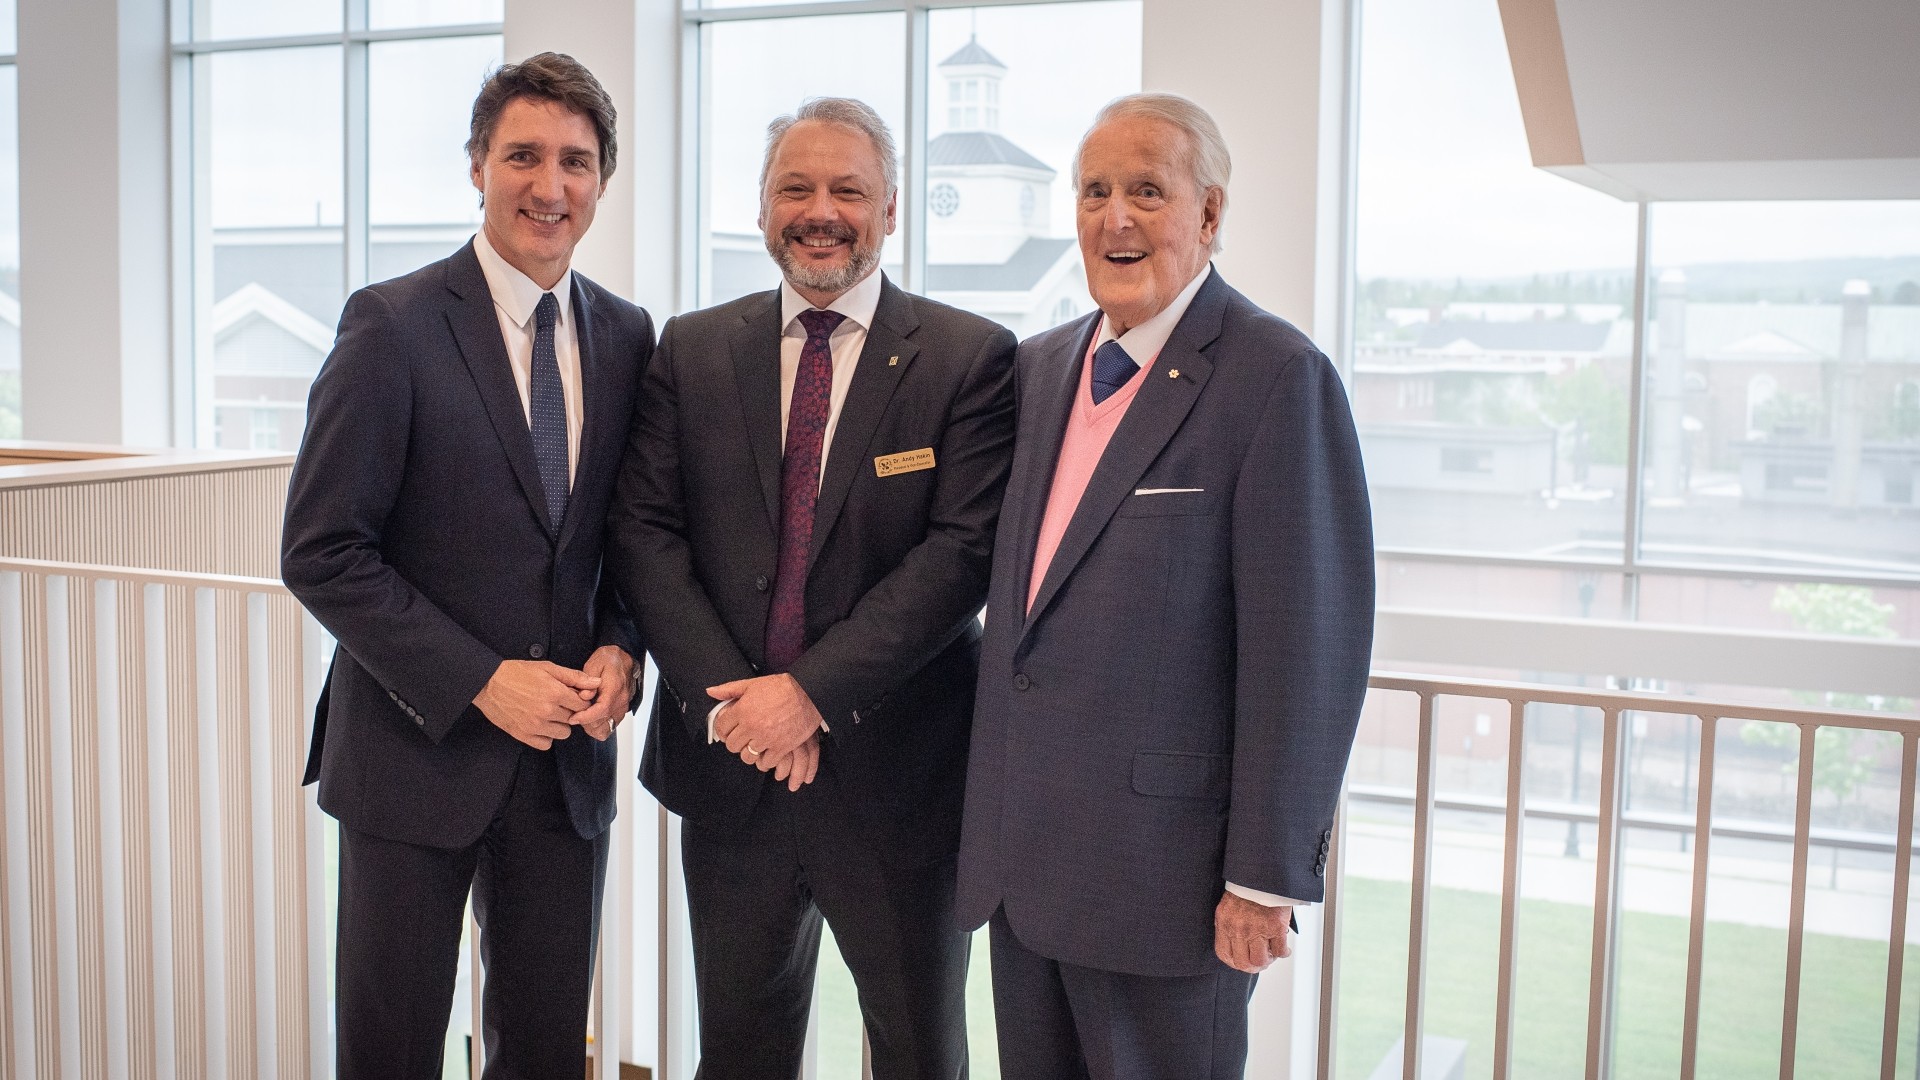 The StFX president standing with two Canadian Prime Ministers